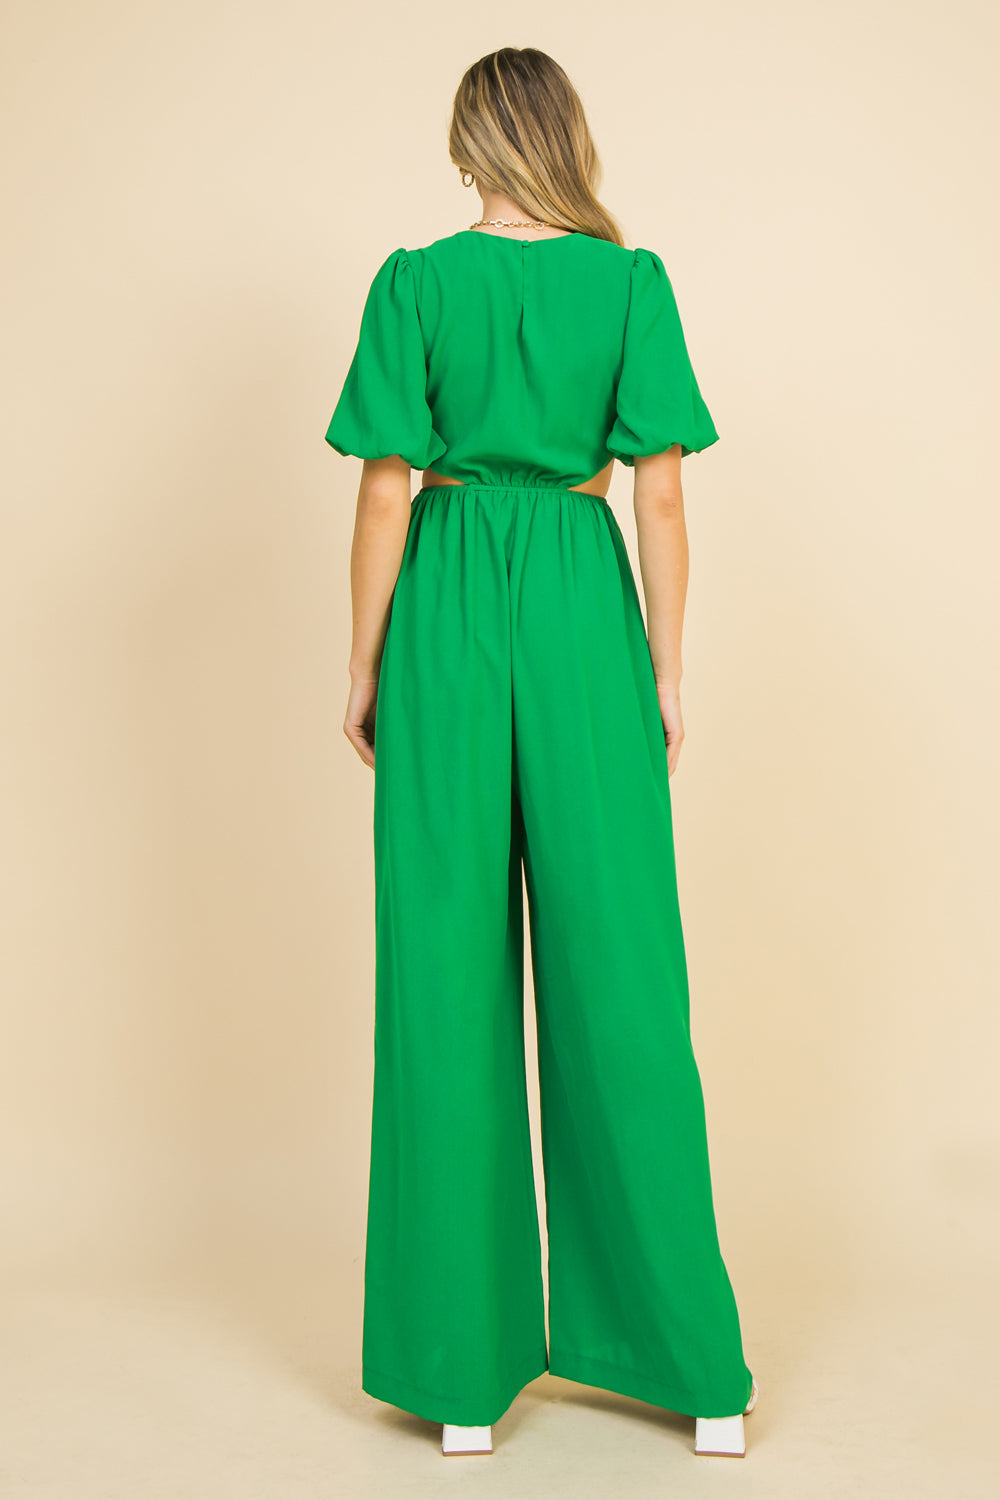 IN MY DREAMS WOVEN JUMPSUIT